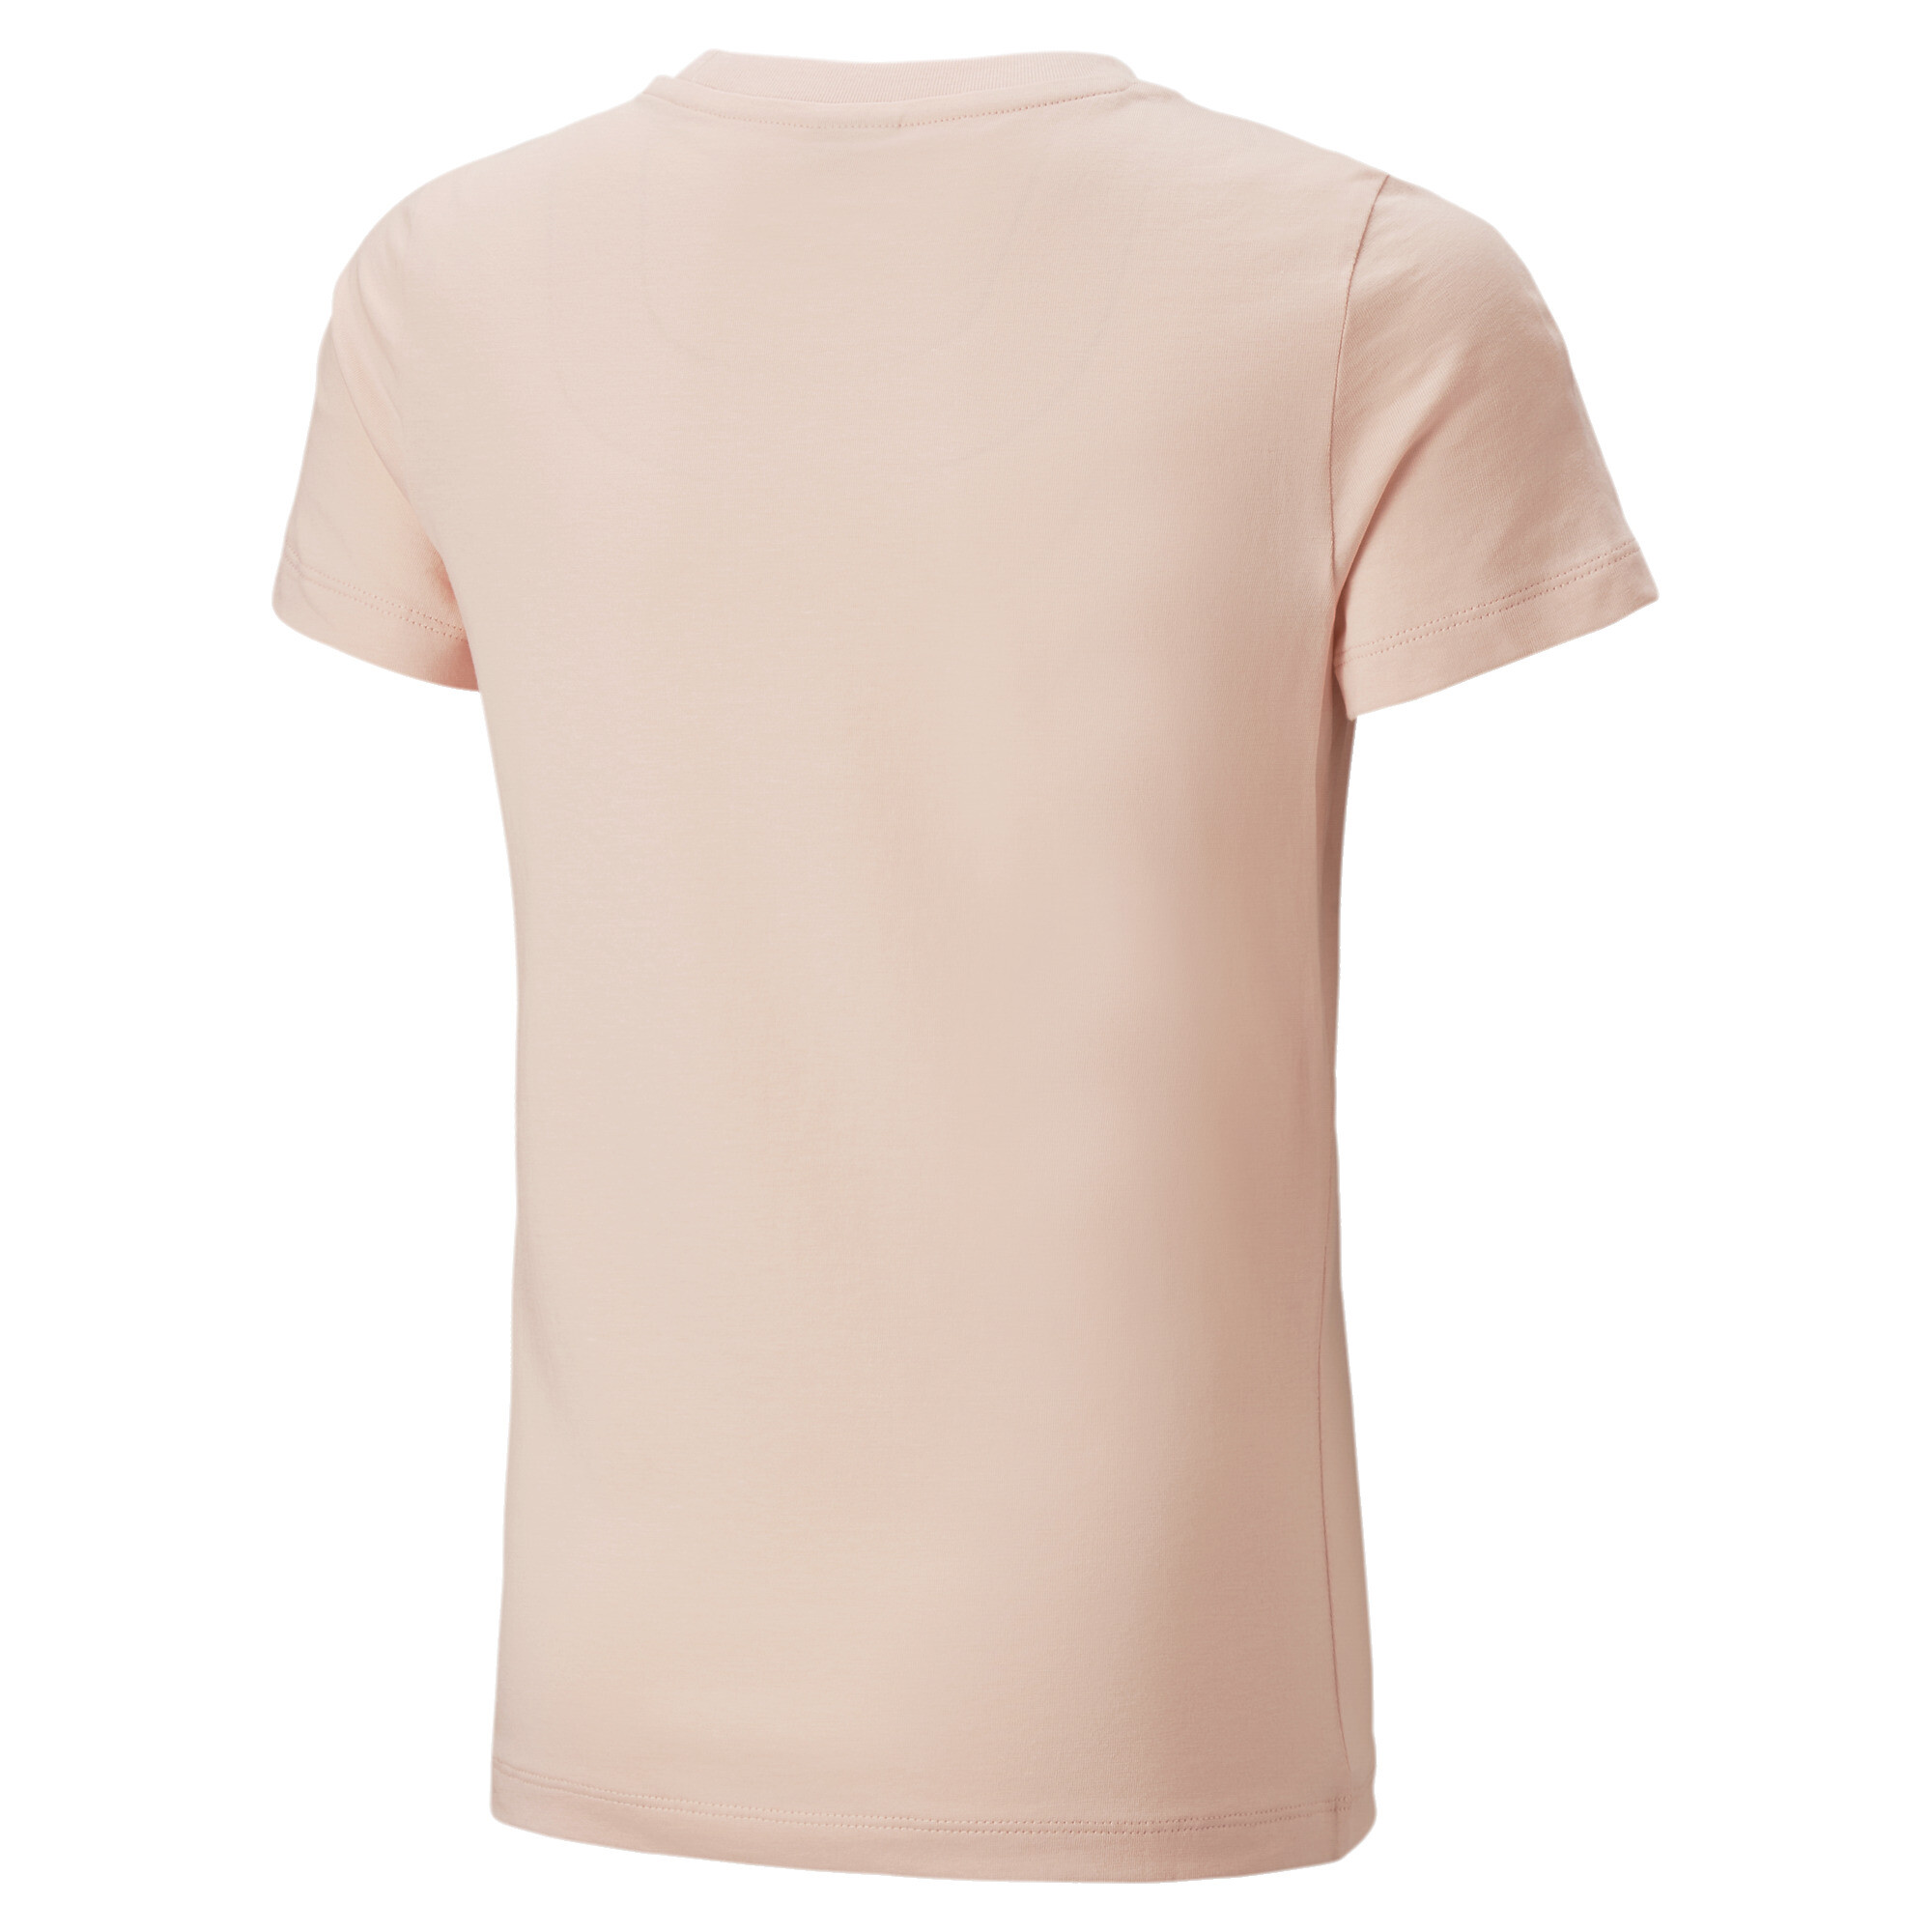 PUMA Classics Logo T-Shirt In Pink, Size 9-10 Youth